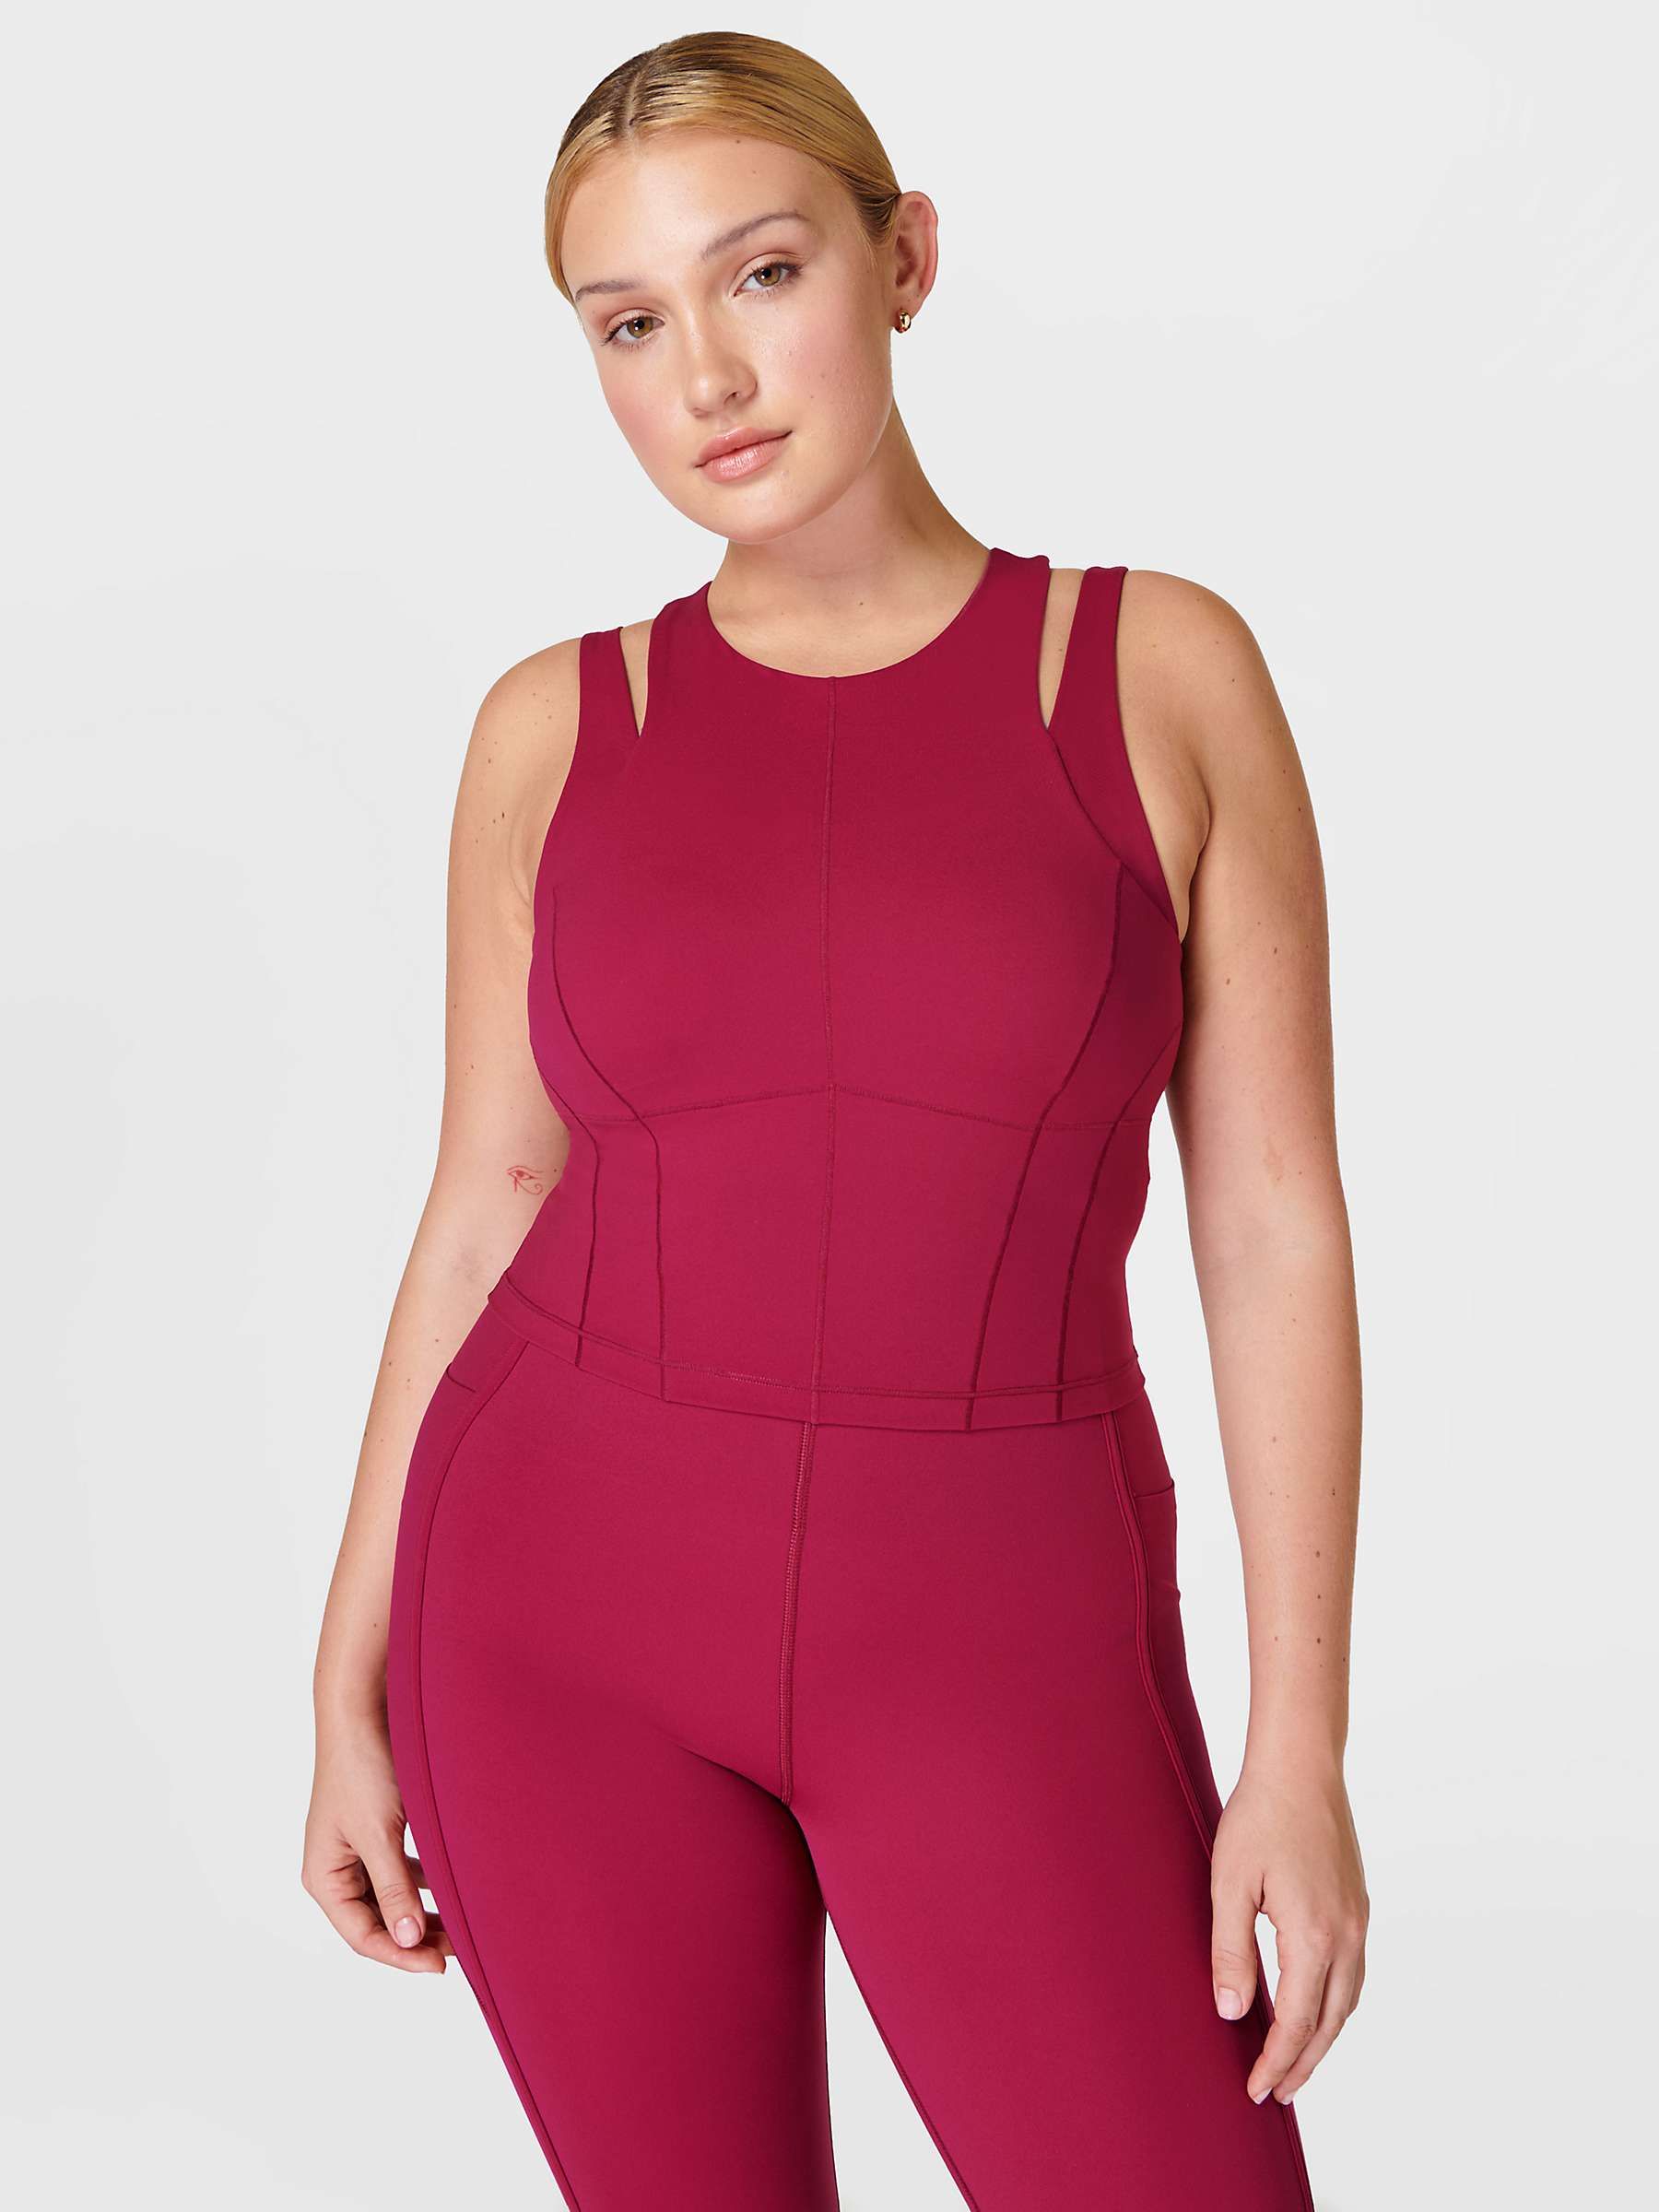 Buy Sweaty Betty Power Contour Workout Tank Top, Vamp Red Online at johnlewis.com